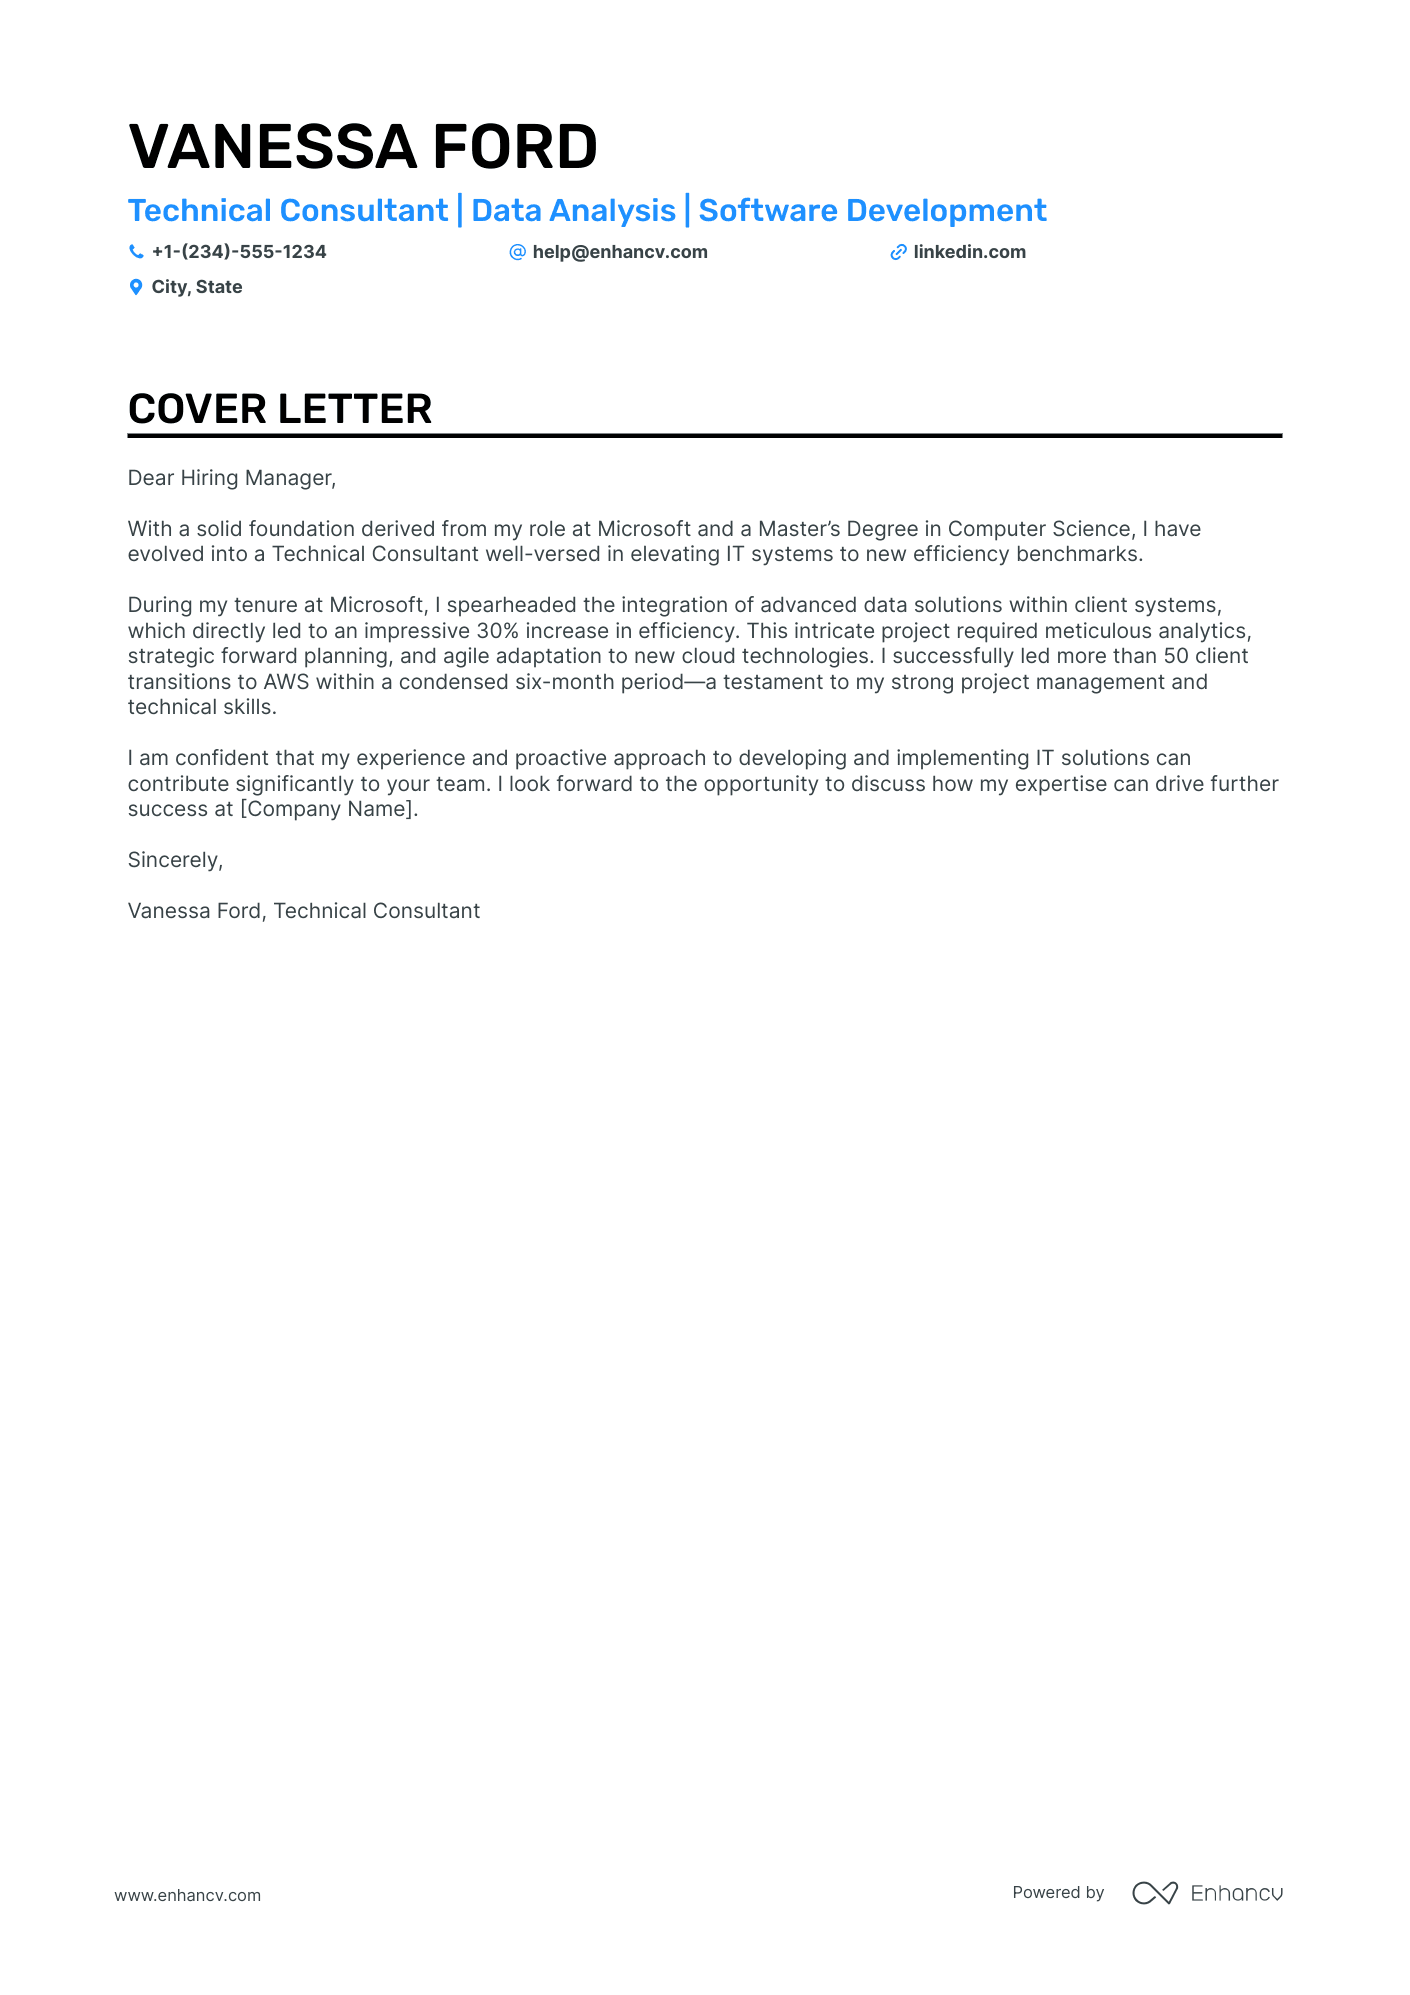 Technical Consultant cover letter